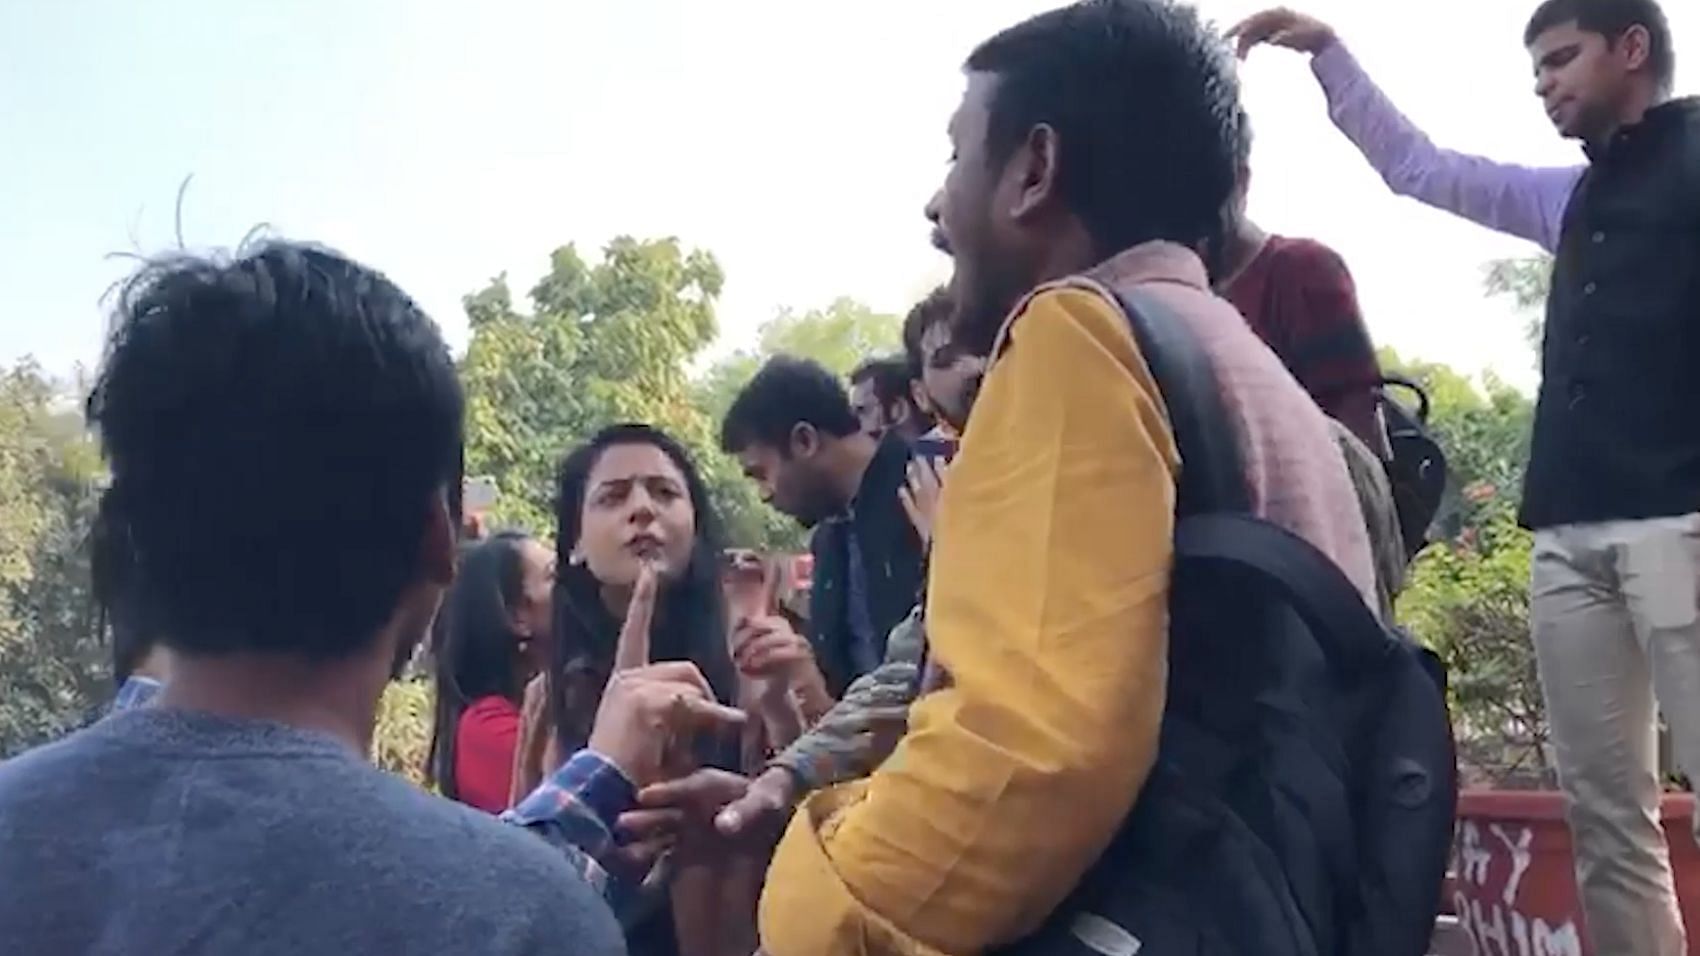 Screengrab from footage of Republic TV reporters in a verbal altercation with JNU students.